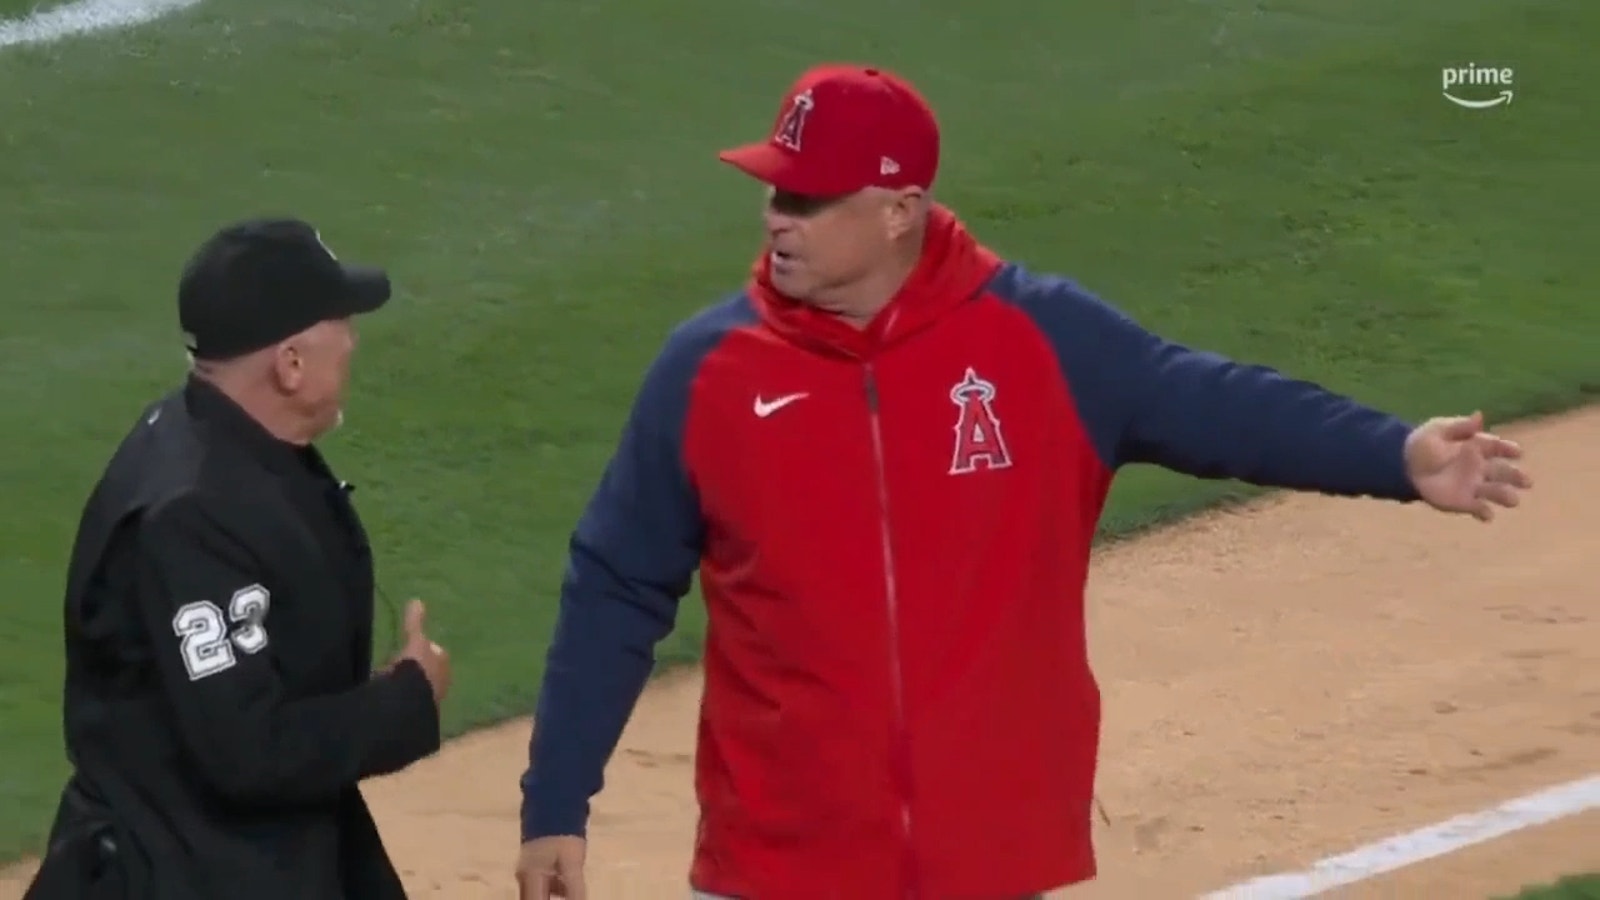 Angels manager Phil Nevin ejected after Mike Trout strikeout dispute